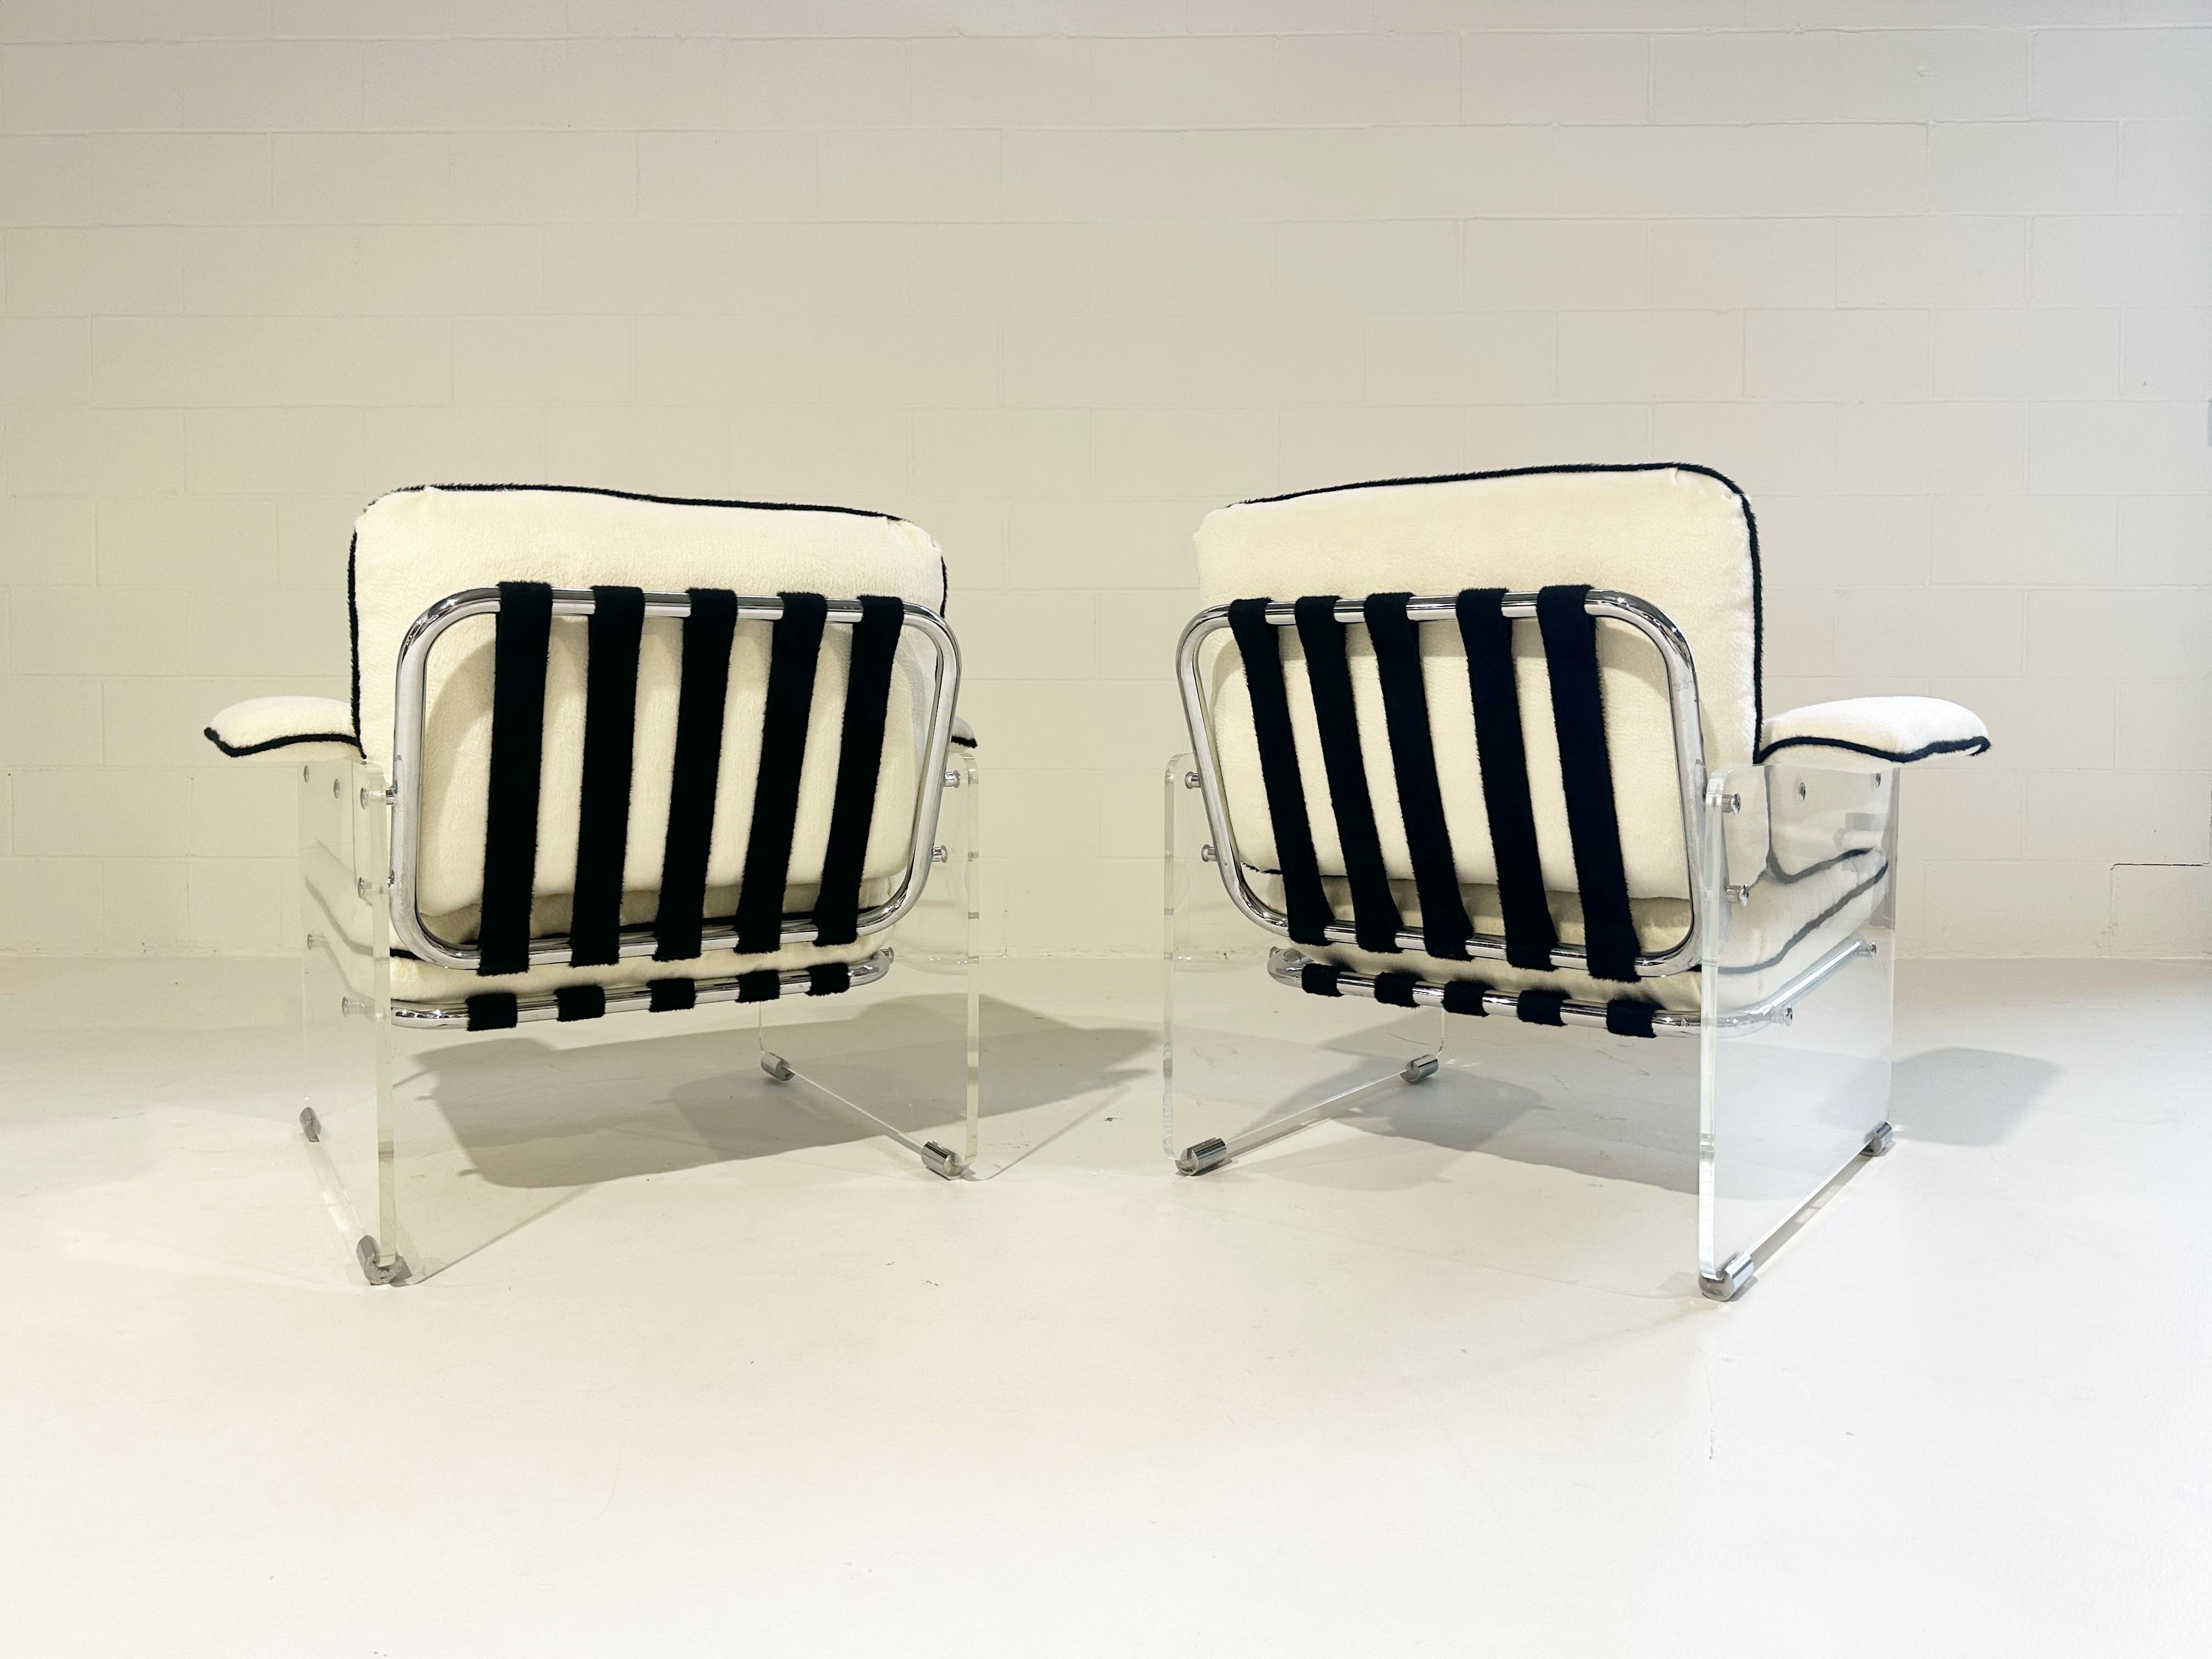 Pace Collection Argenta Lucite Chairs in Inata Alpaca Fabric, pair In Good Condition For Sale In SAINT LOUIS, MO